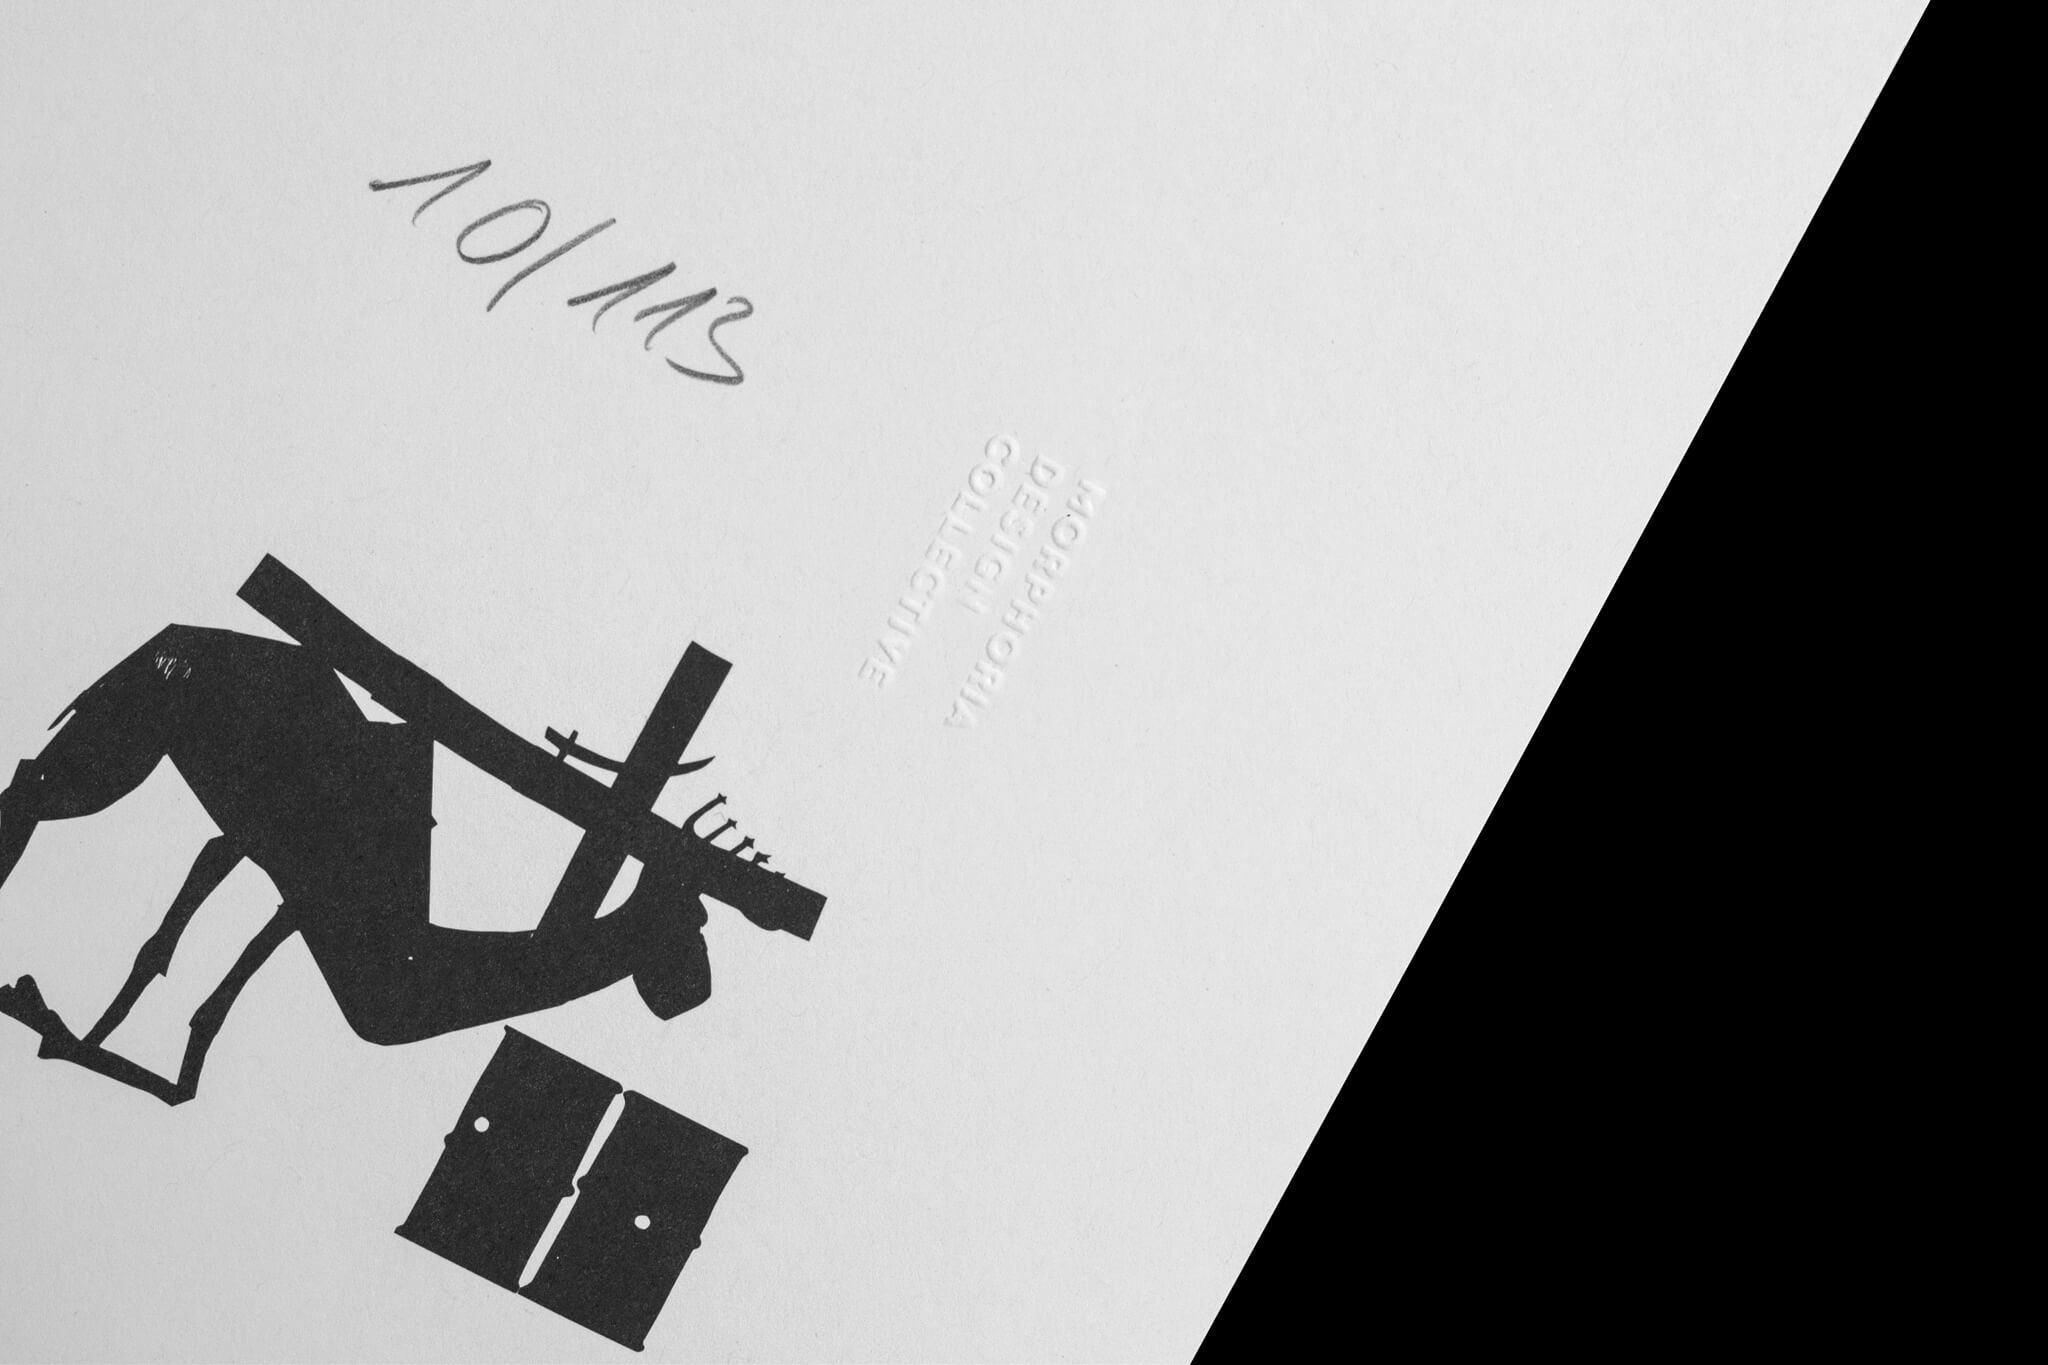 gezählte Edition Stempel mit Letterpress / counted edition stamp with letterpress